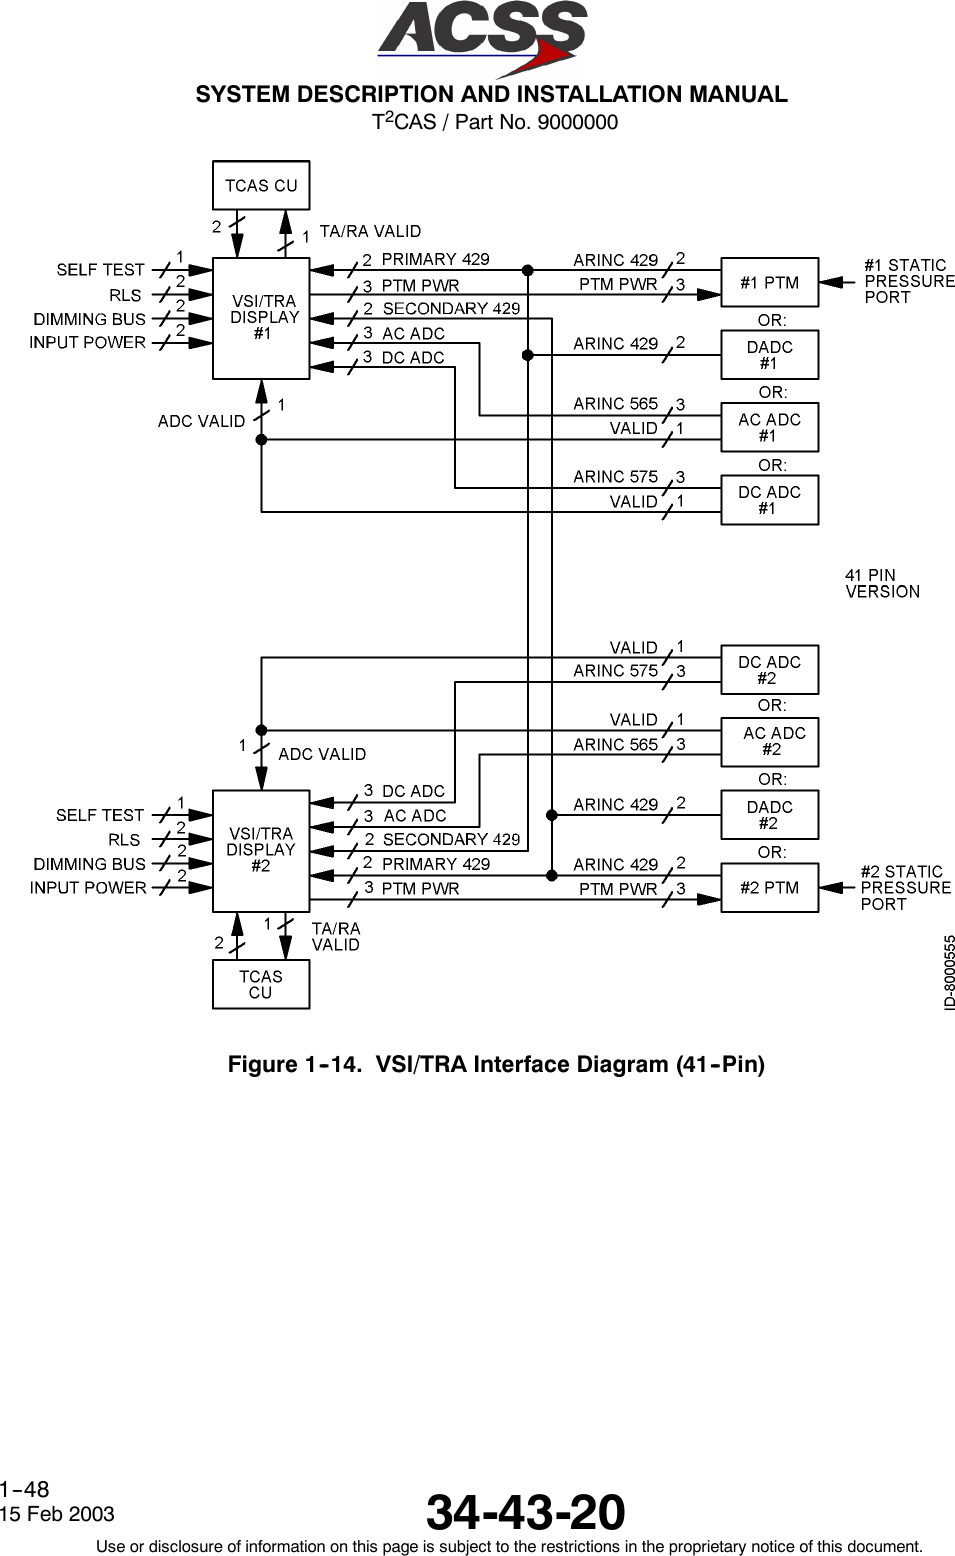 T2CAS / Part No. 9000000SYSTEM DESCRIPTION AND INSTALLATION MANUAL34-43-2015 Feb 2003Use or disclosure of information on this page is subject to the restrictions in the proprietary notice of this document.1--48Figure 1--14. VSI/TRA Interface Diagram (41--Pin)